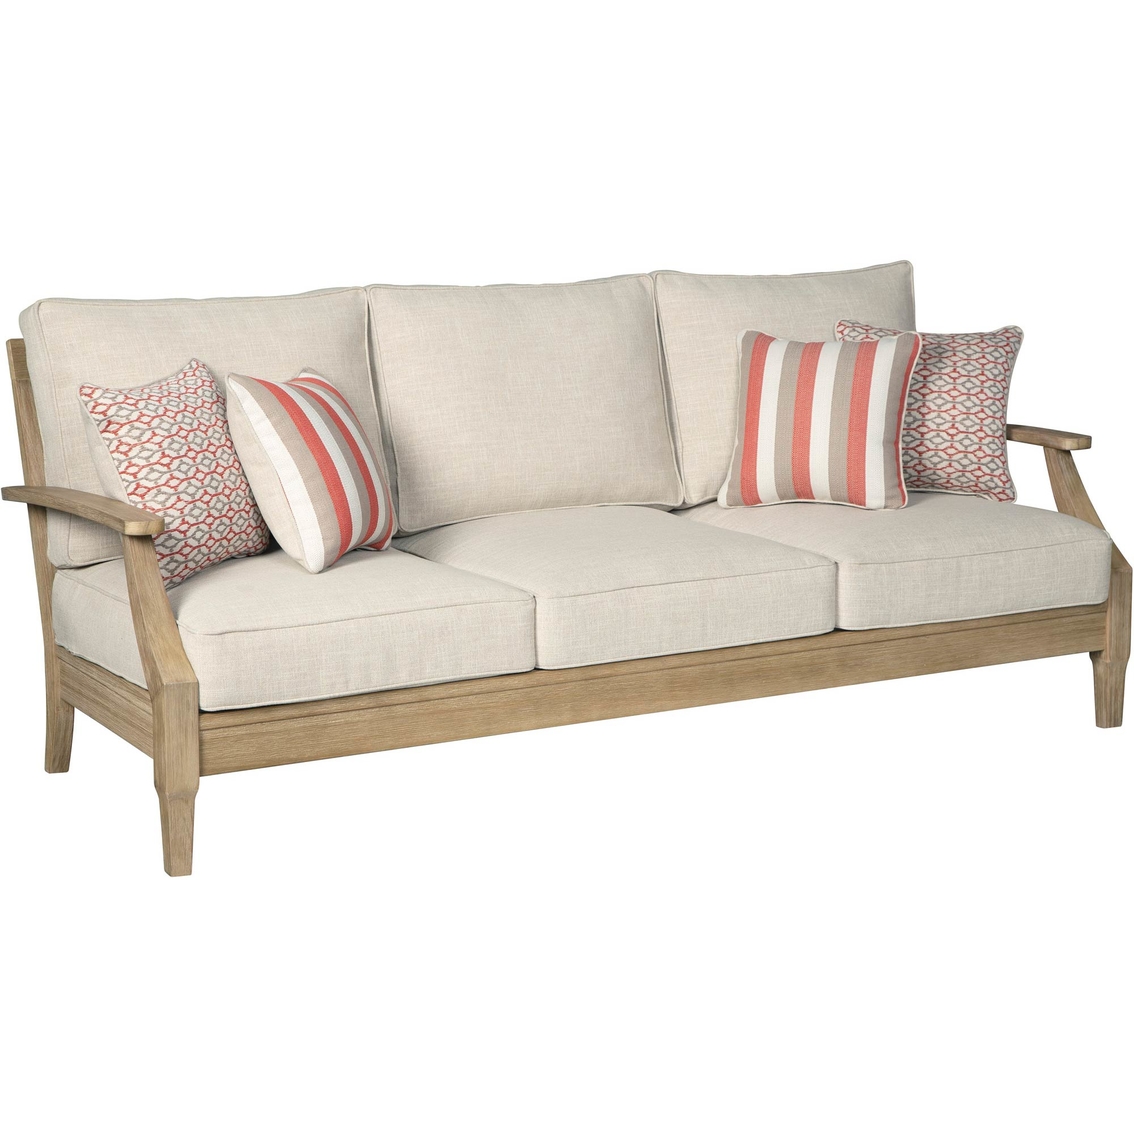 Signature Design by Ashley Clare View 5 pc. Outdoor Sofa Set - Image 3 of 8